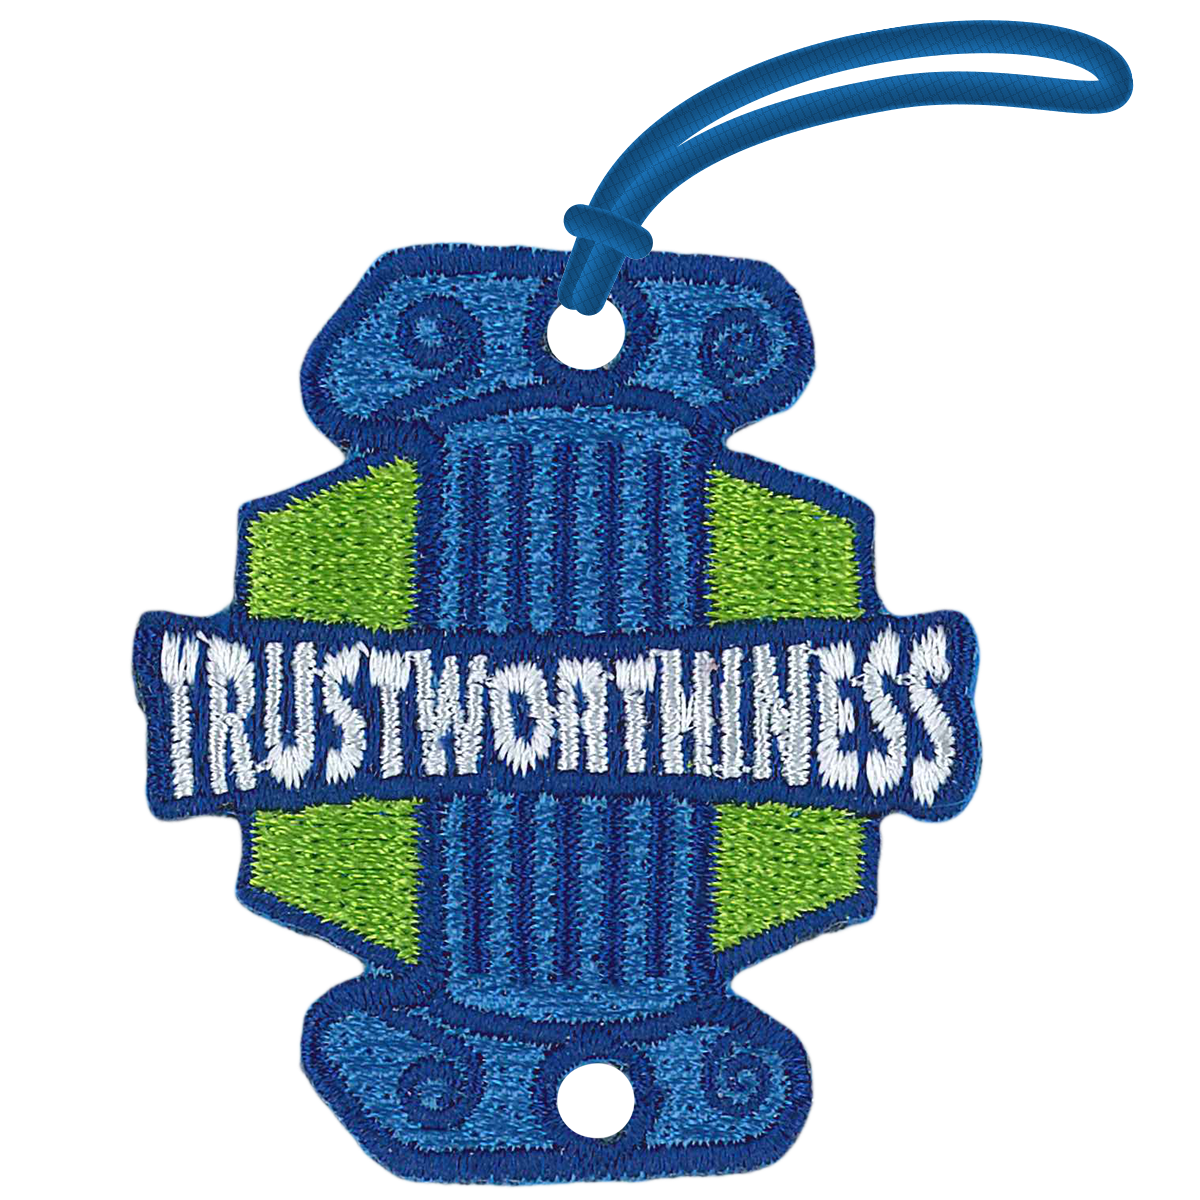 PATCH Tag – Trustworthiness